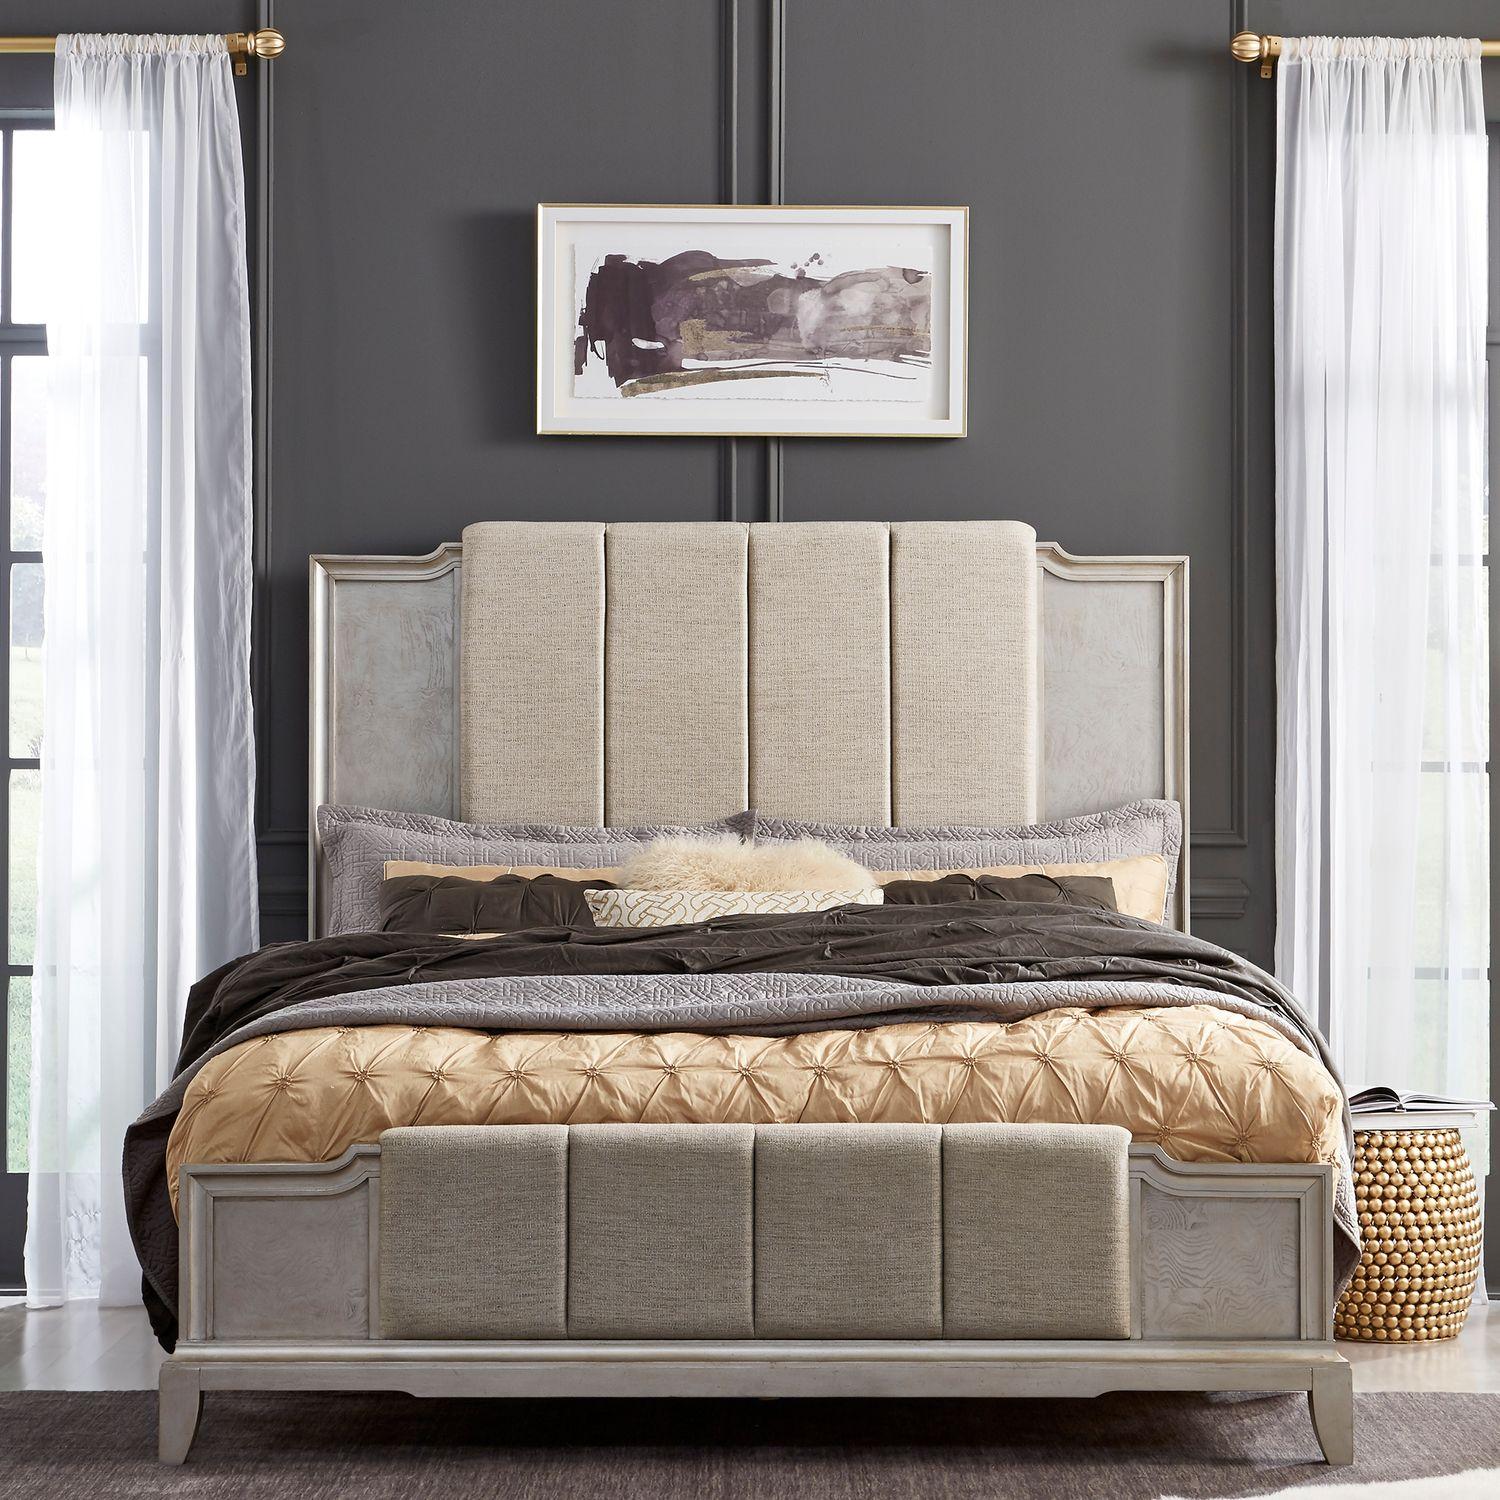 Modern Upholstered Bed Montage (849-BR) 849-BR-KUB in Platinum Fabric